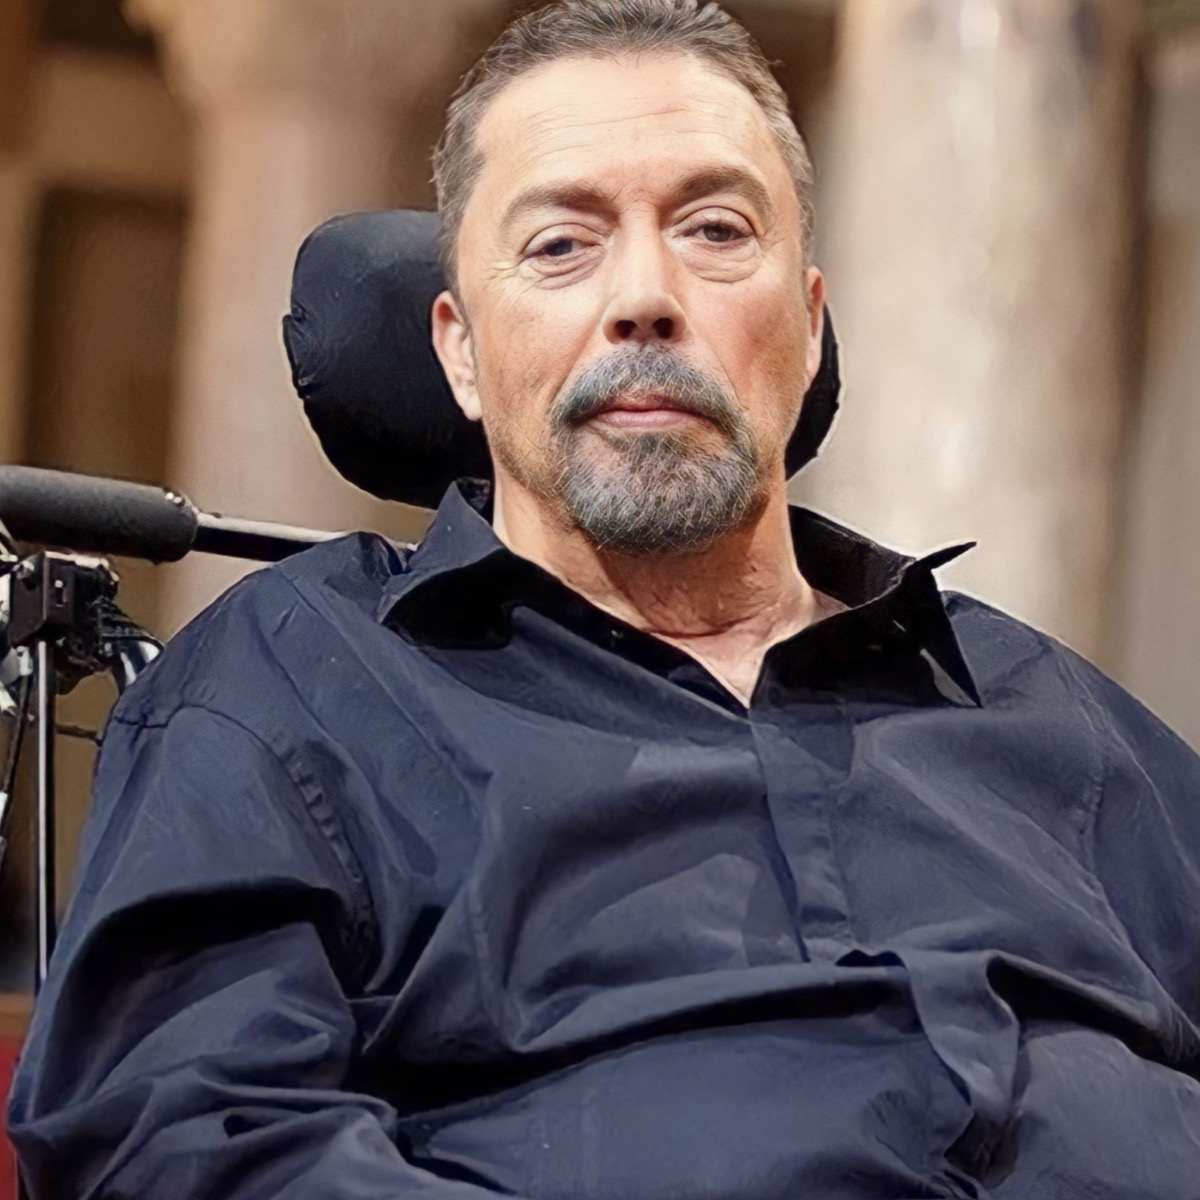 Tim Curry ces jours-ci